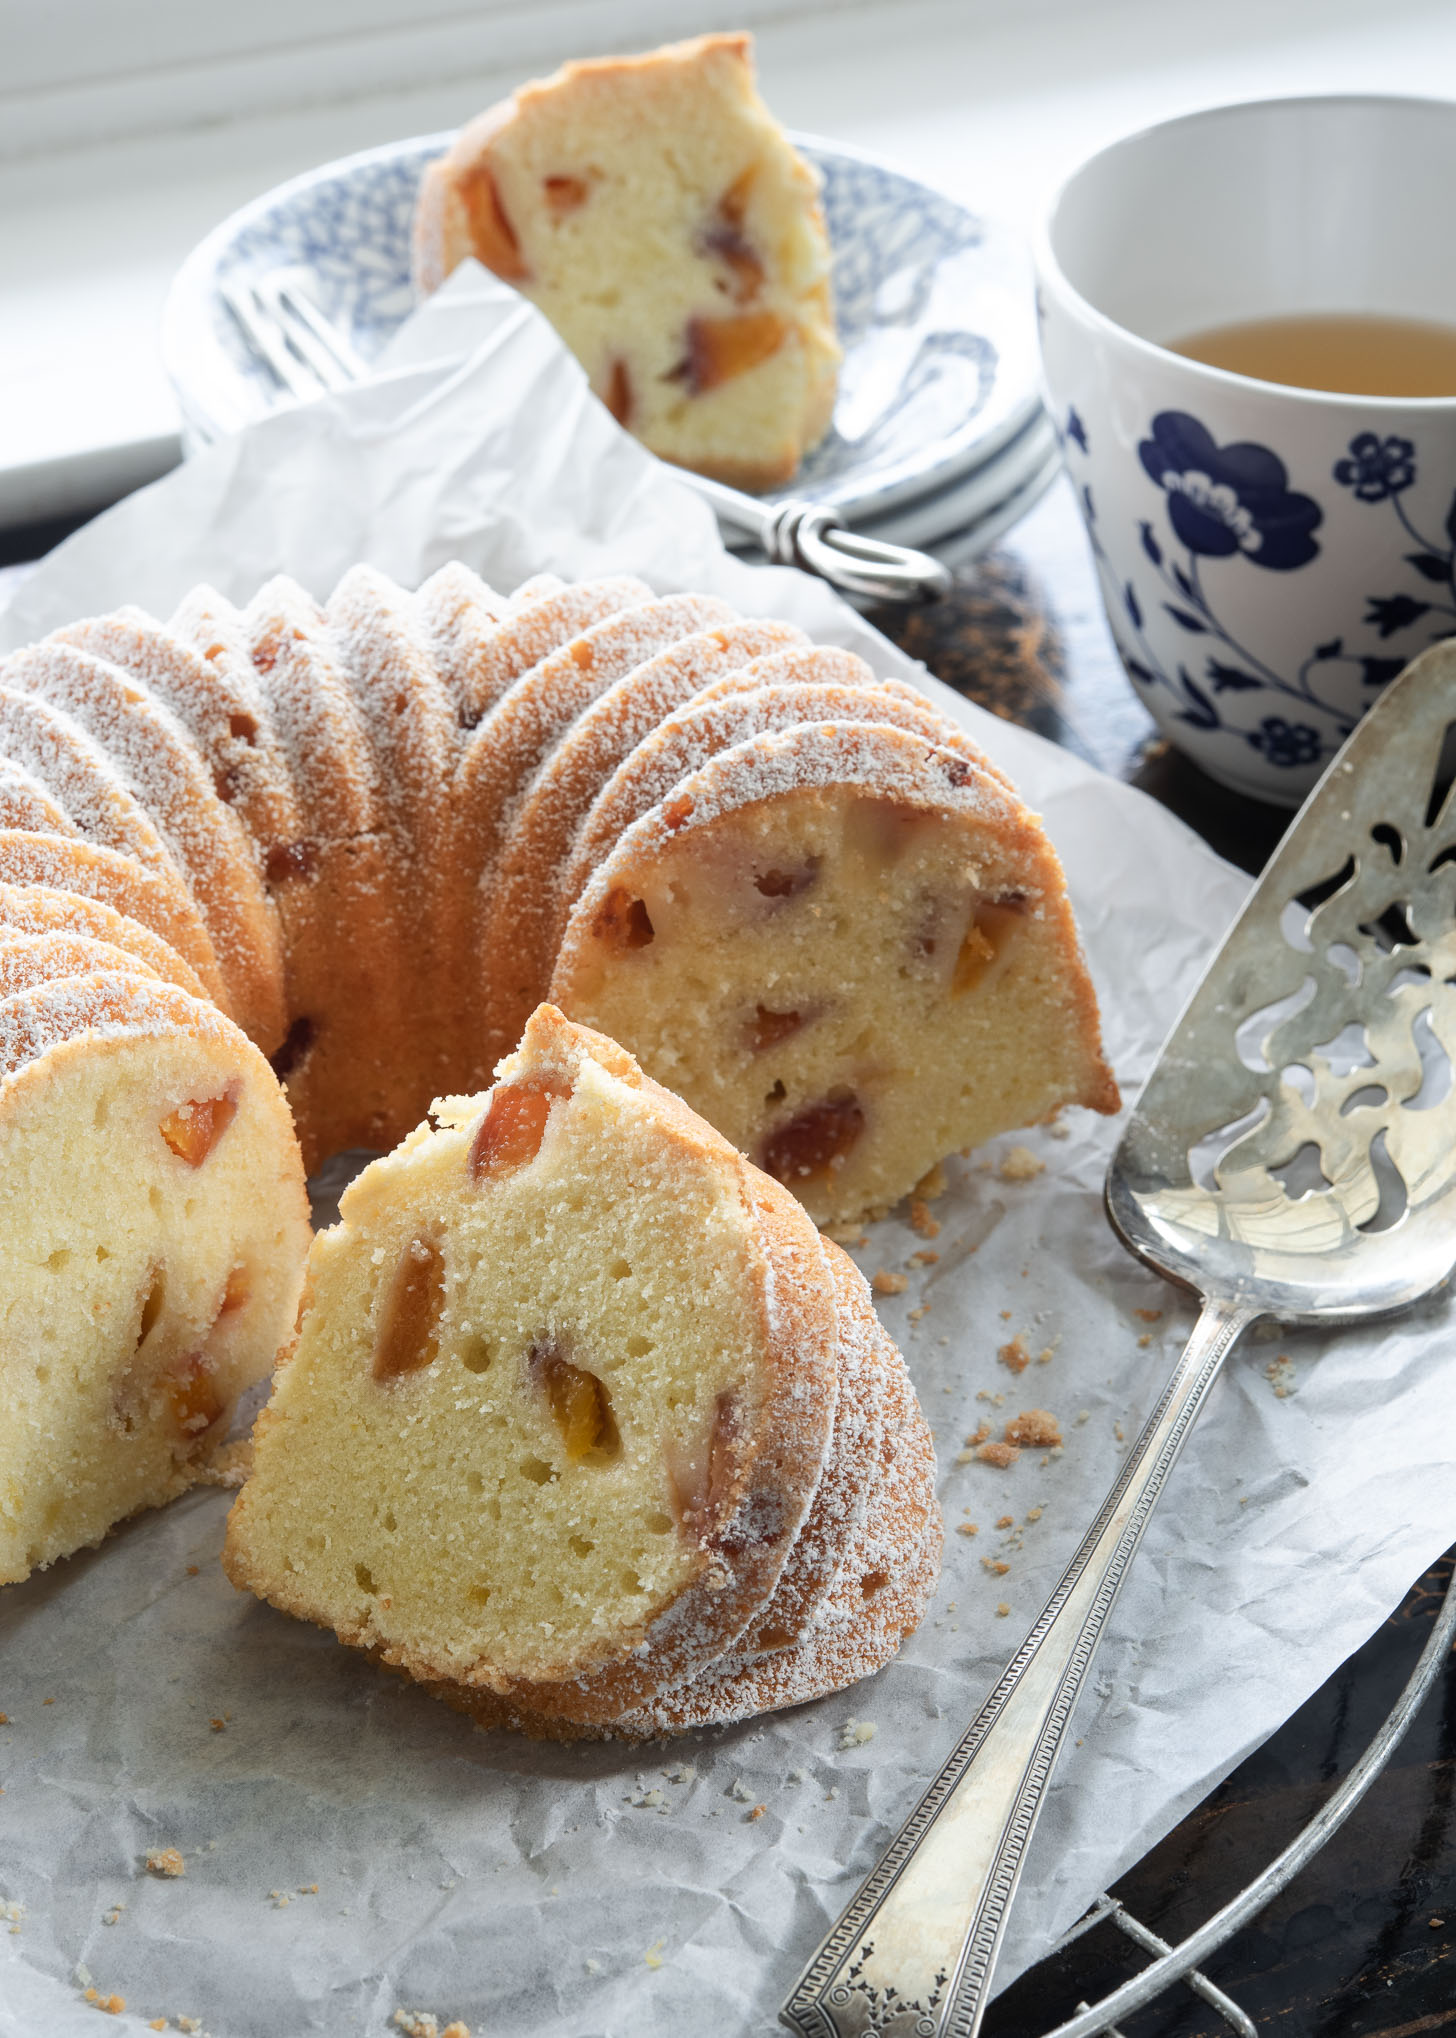 Peach pound cake baked in a bundt pan is dusted with powdered sugar and sliced.